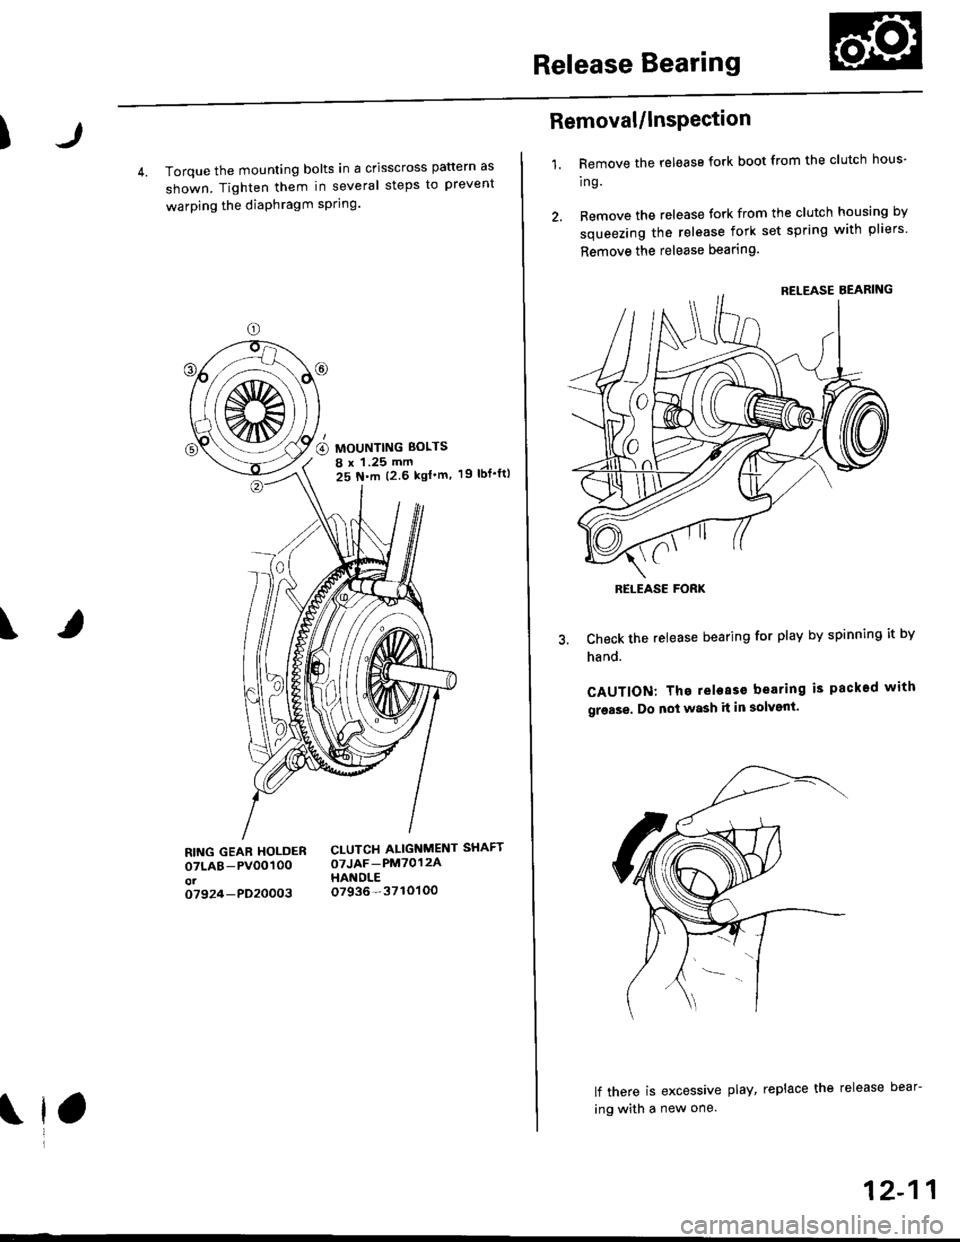 HONDA CIVIC 1997 6.G Owners Manual Release Bearing
)
4. Torque the mounting bolts in a crisscross pattern as
shown. Tighten them in several steps to prevent
warping the diaPhragm sPring.
19 rbf.ft)
\
RING GEAR HOLDERoTLAB-PV00100ot0792